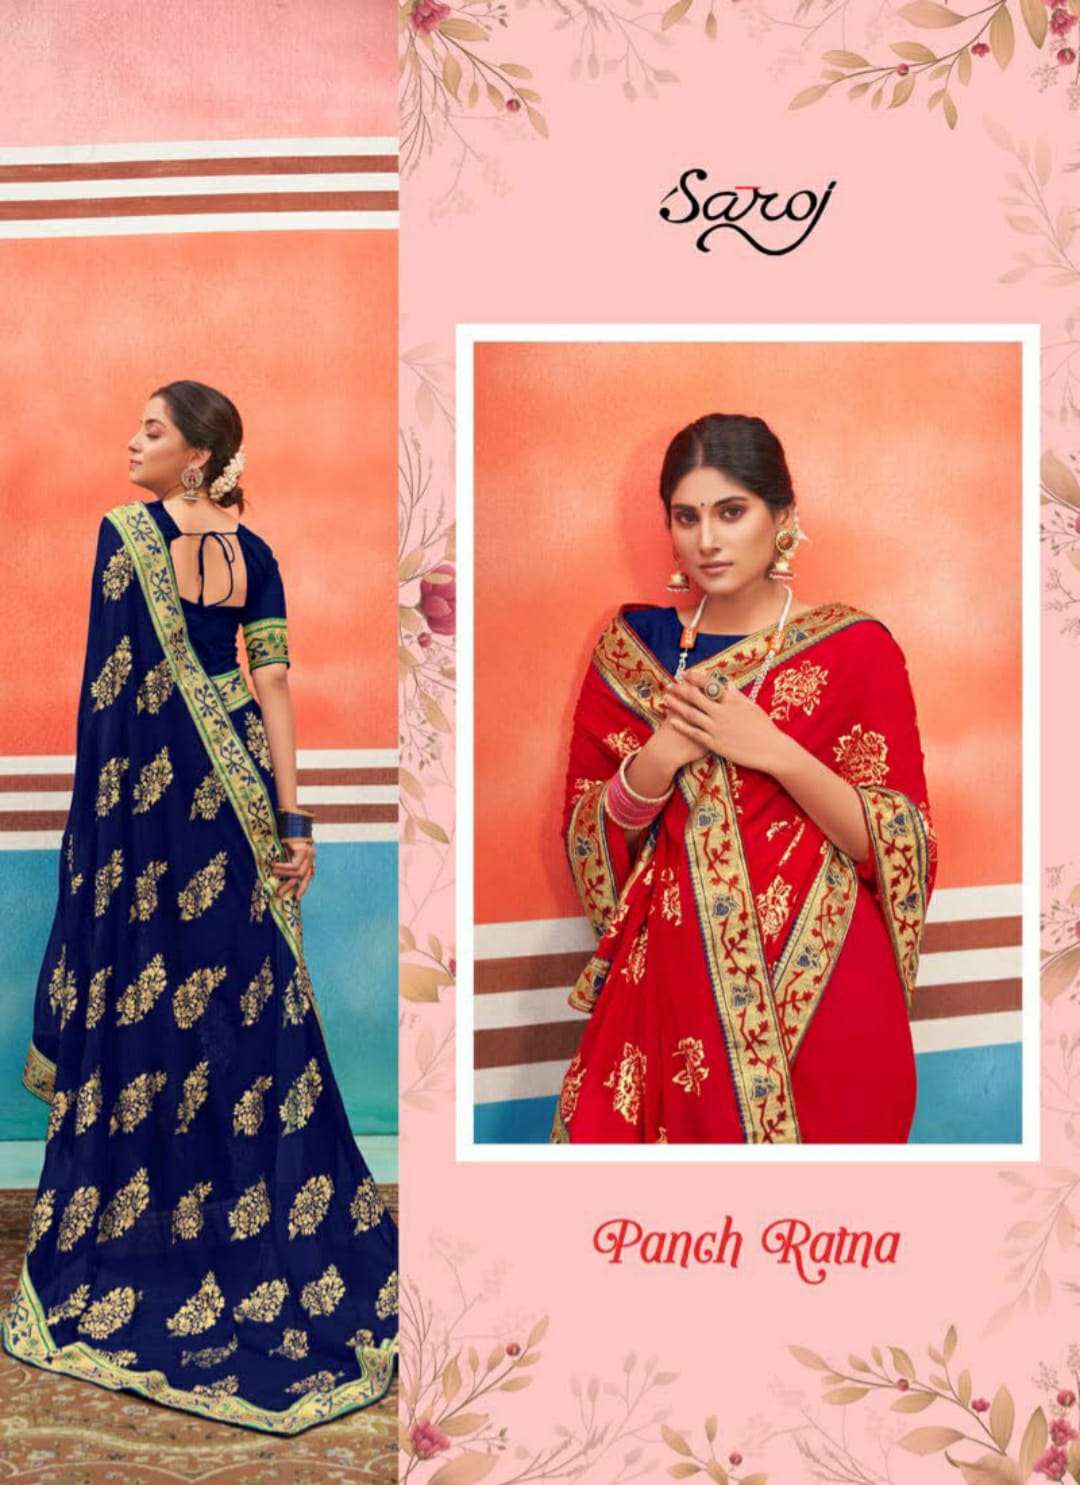 Saroj sarees Panch Ratn designer  weightless Georgette with Foil butta and Border party wear saree in wholesale rate